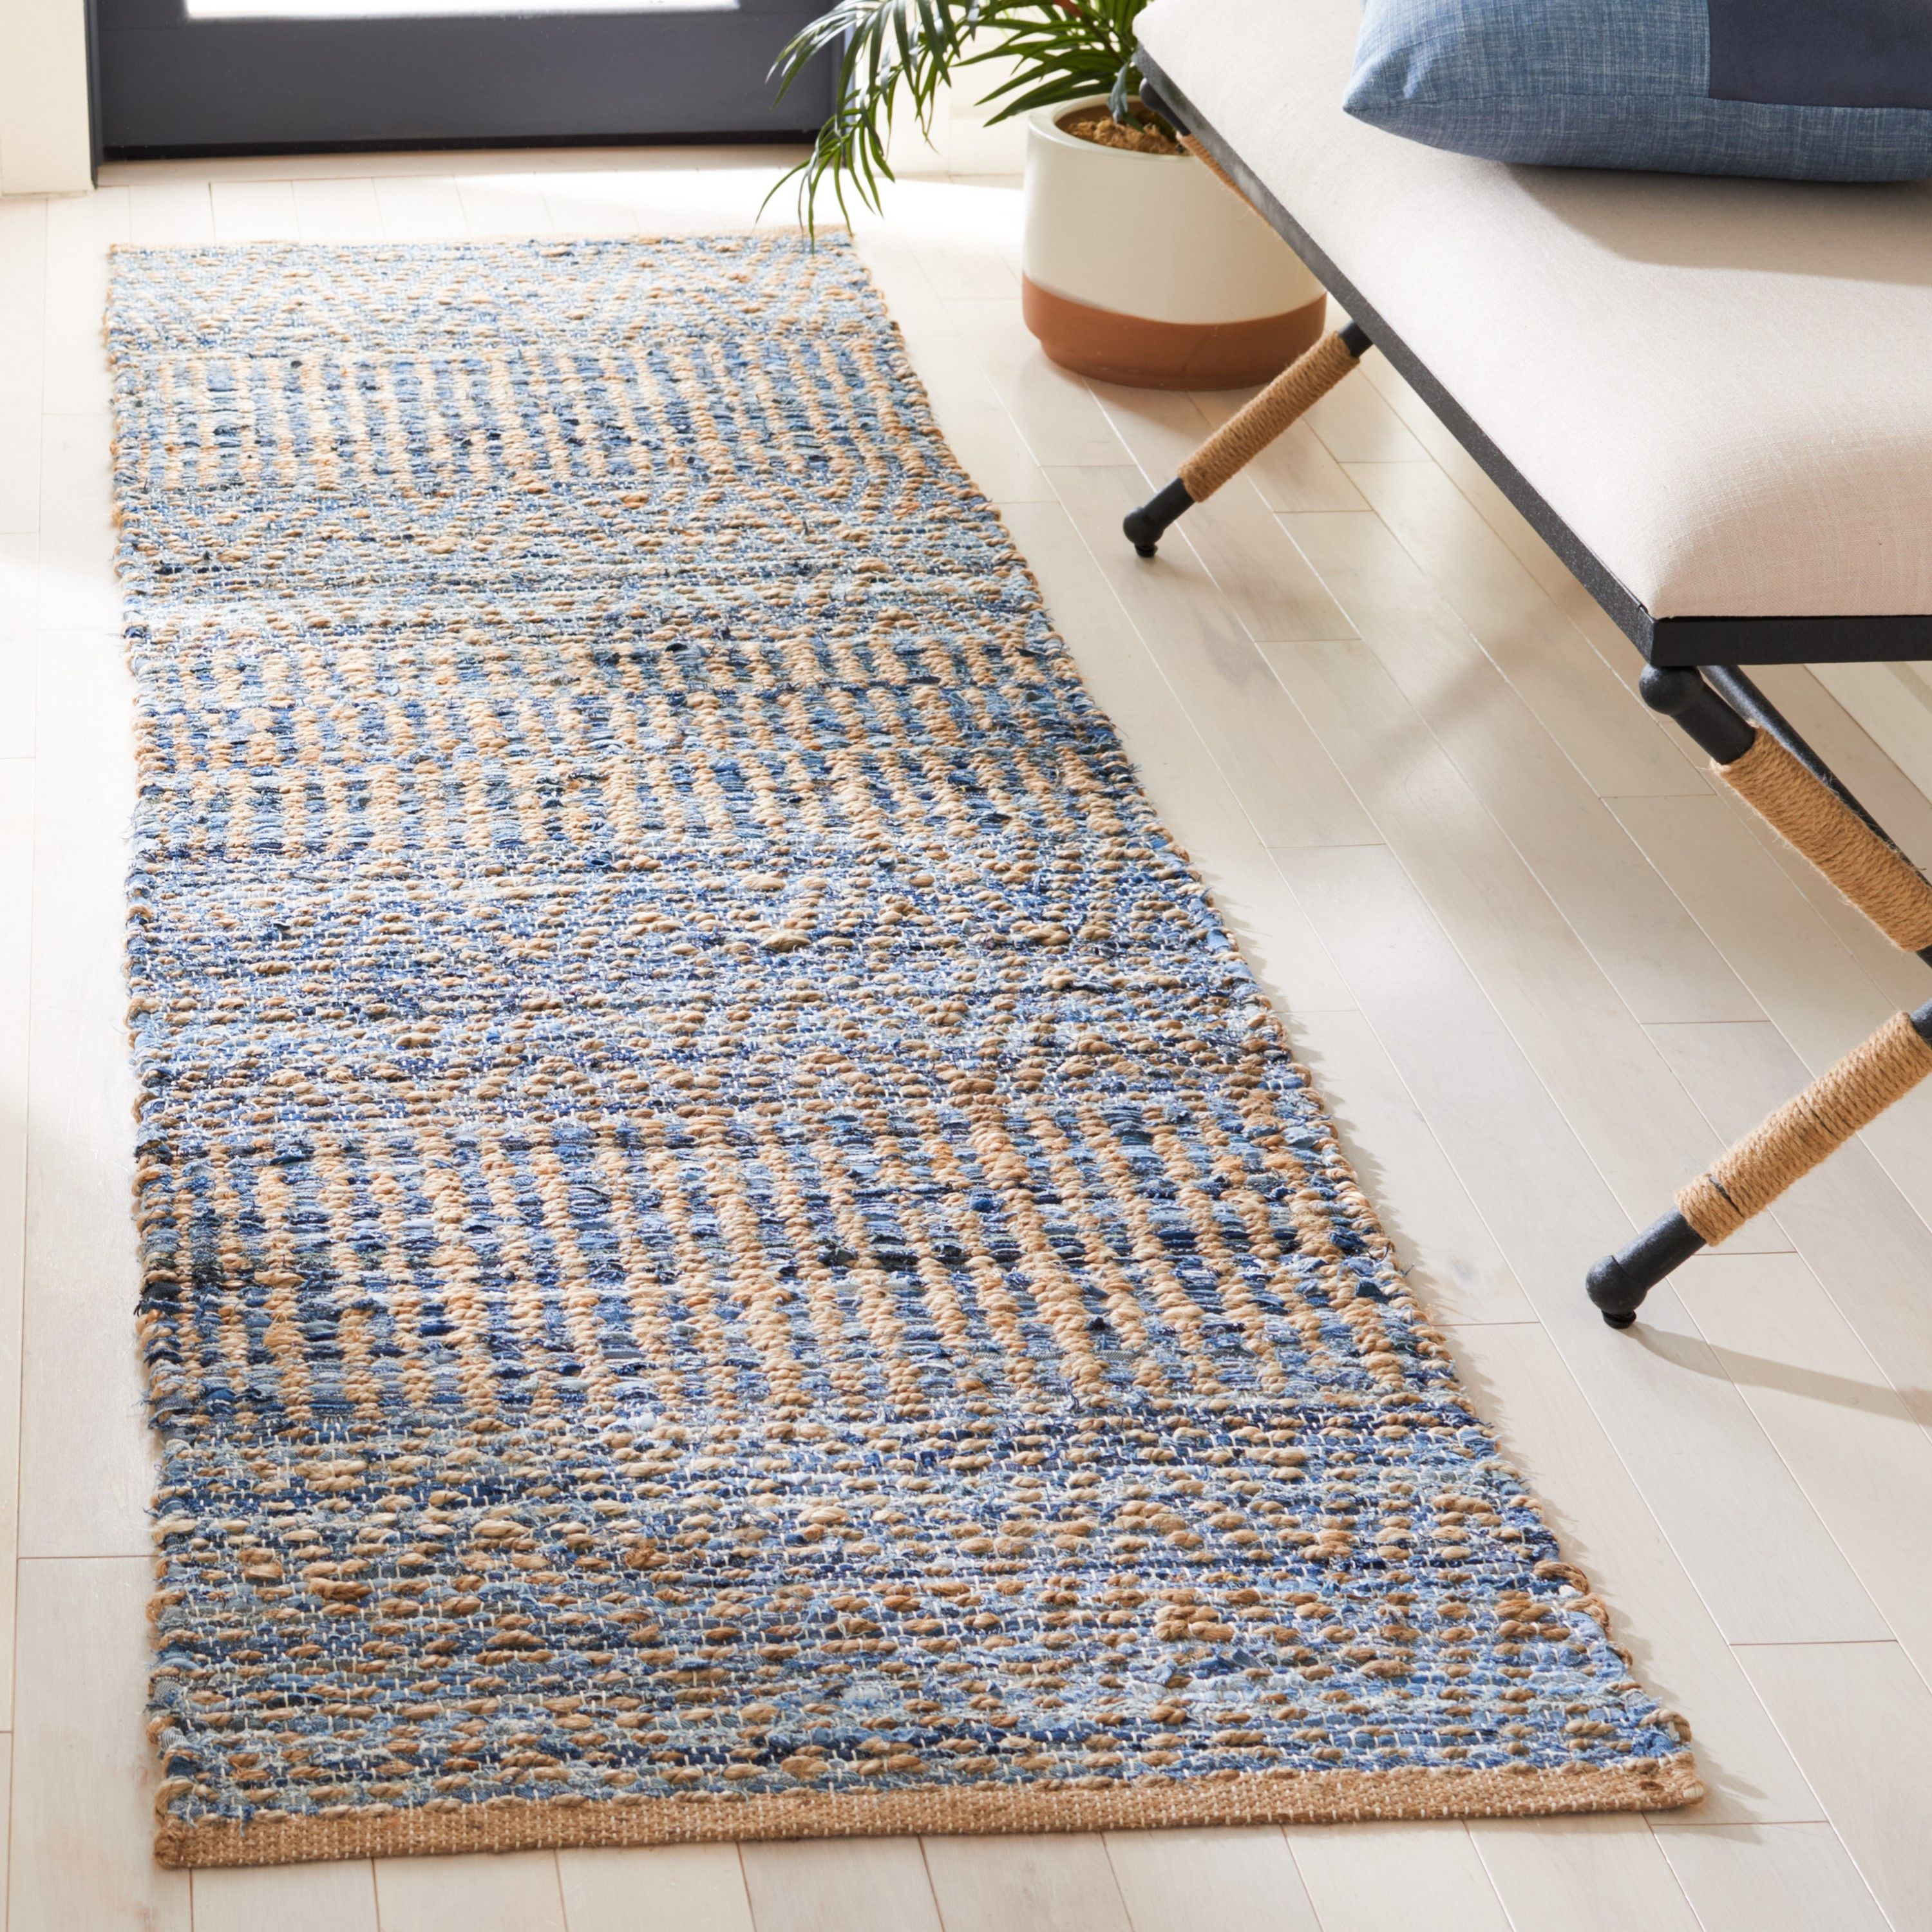 Safavieh 2 X 16 Jute Natural/blue Indoor Abstract Coastal Runner Rug In The  Rugs Department At Lowes Intended For Coastal Runner Rugs (View 4 of 15)